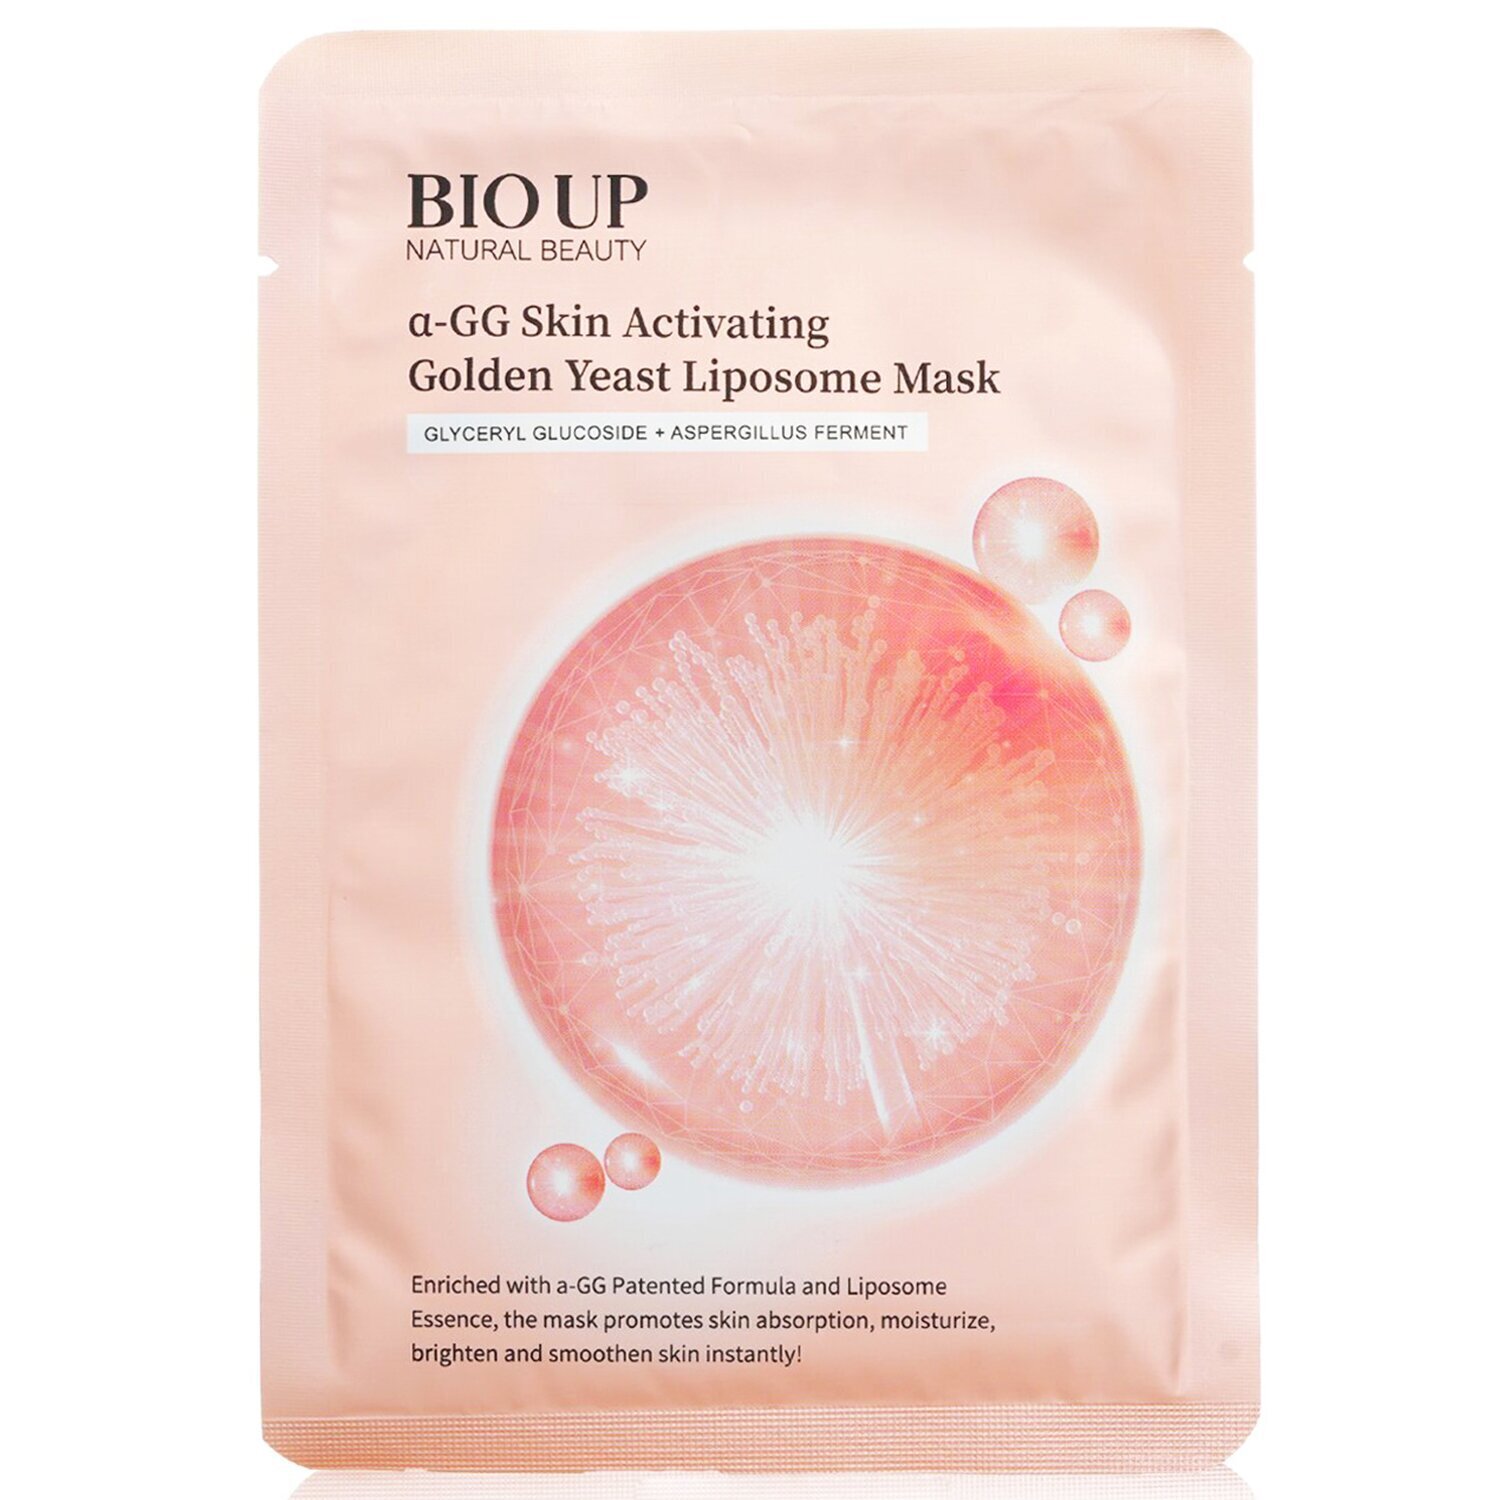 Natural Beauty BIO UP a-GG Skin Activating Golden Yeast Liposome Mask 5 x 25ml/0.84oz